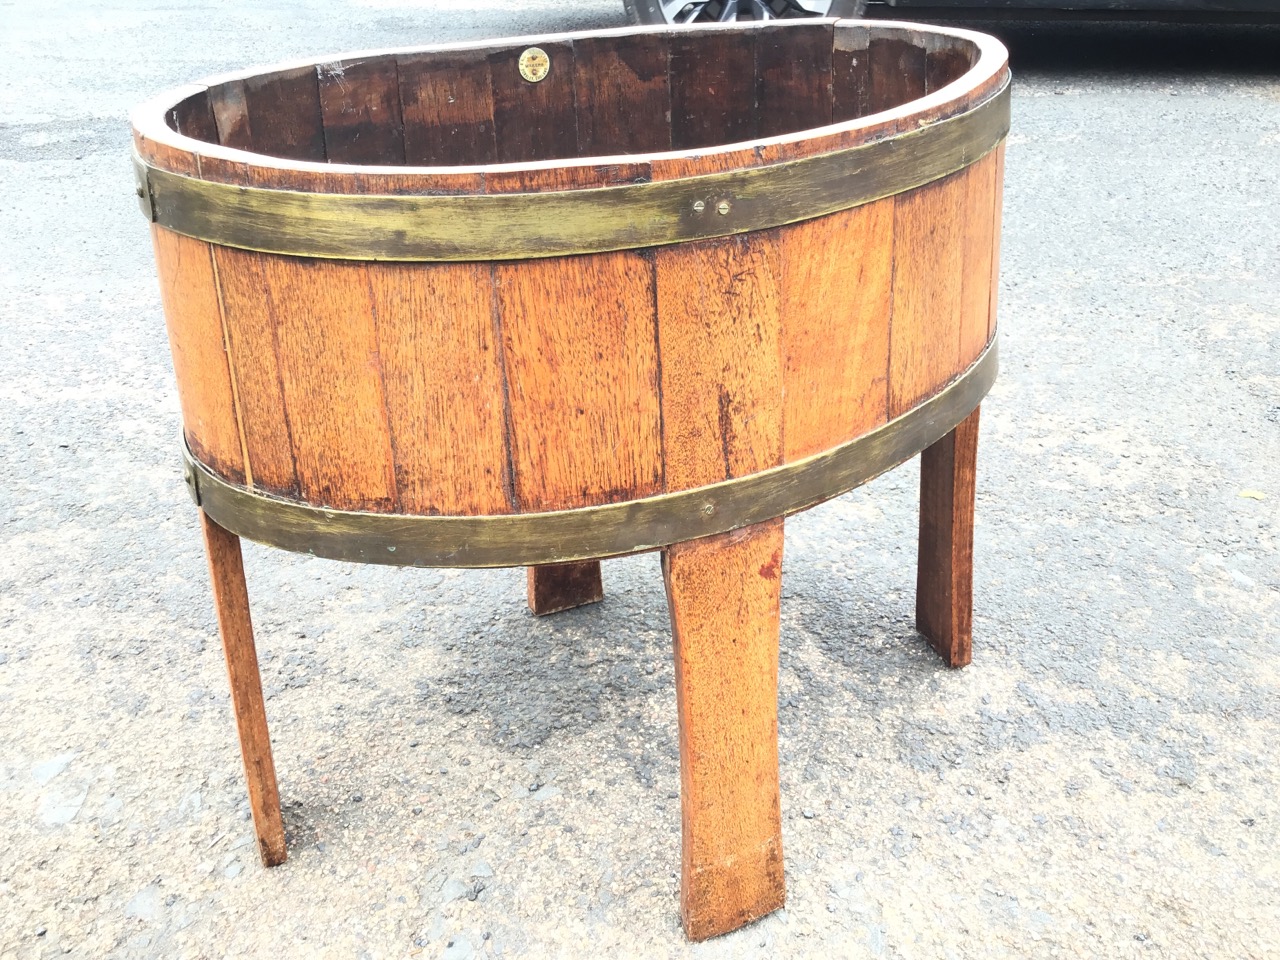 A coopered oak planter, the oval stand with brass hoops and zinc liner on stave legs, bearing makers